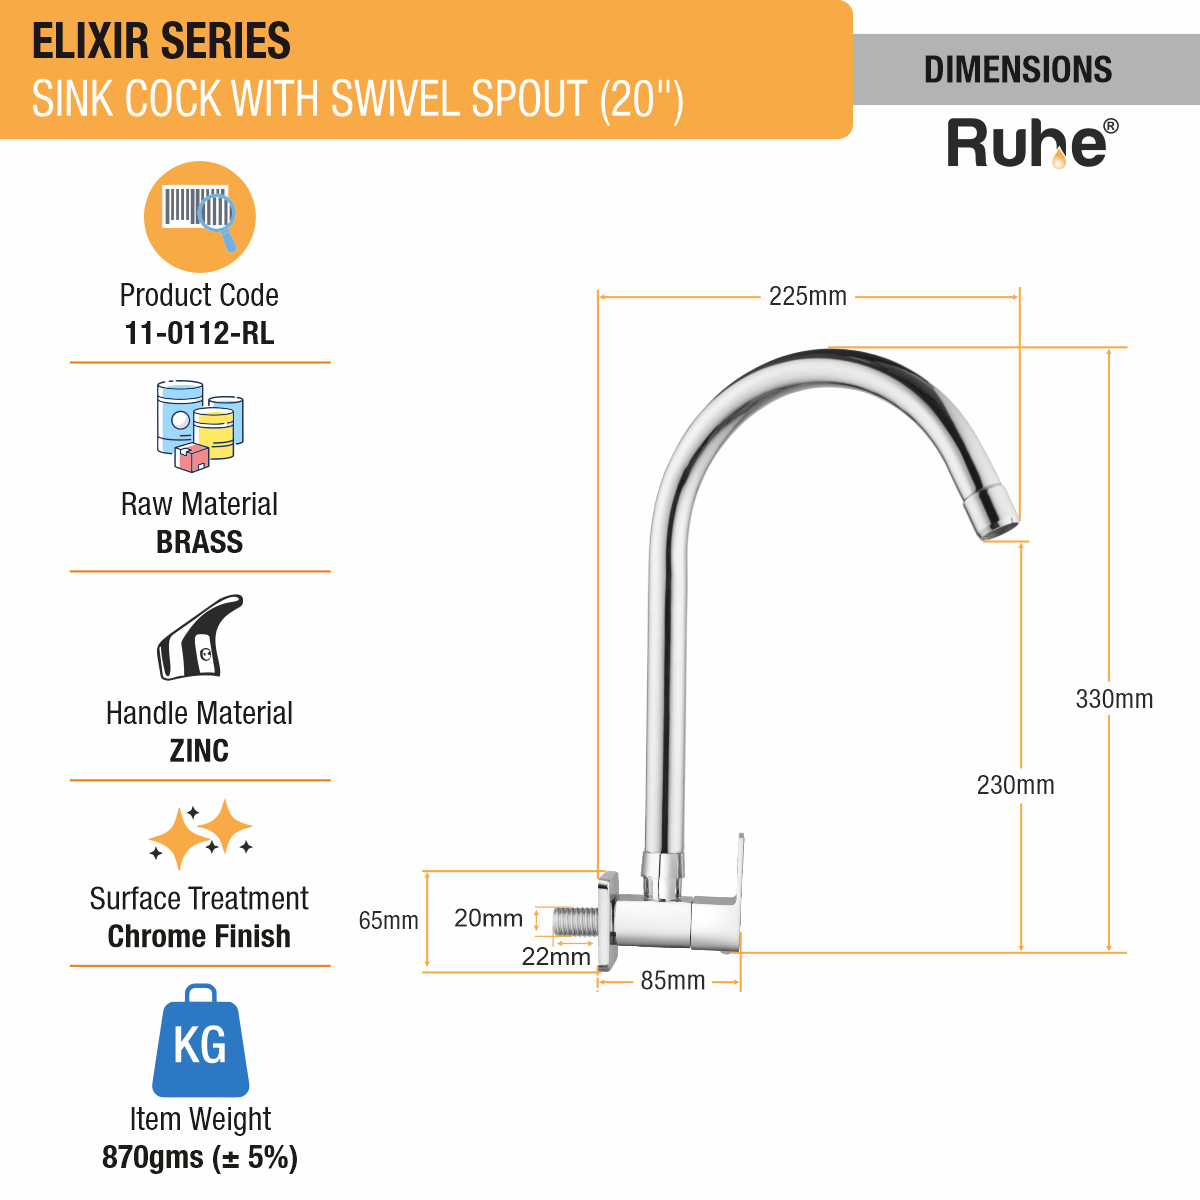 Elixir Sink Tap with Large (20 inches) Round Swivel Spout Faucet dimensions and size